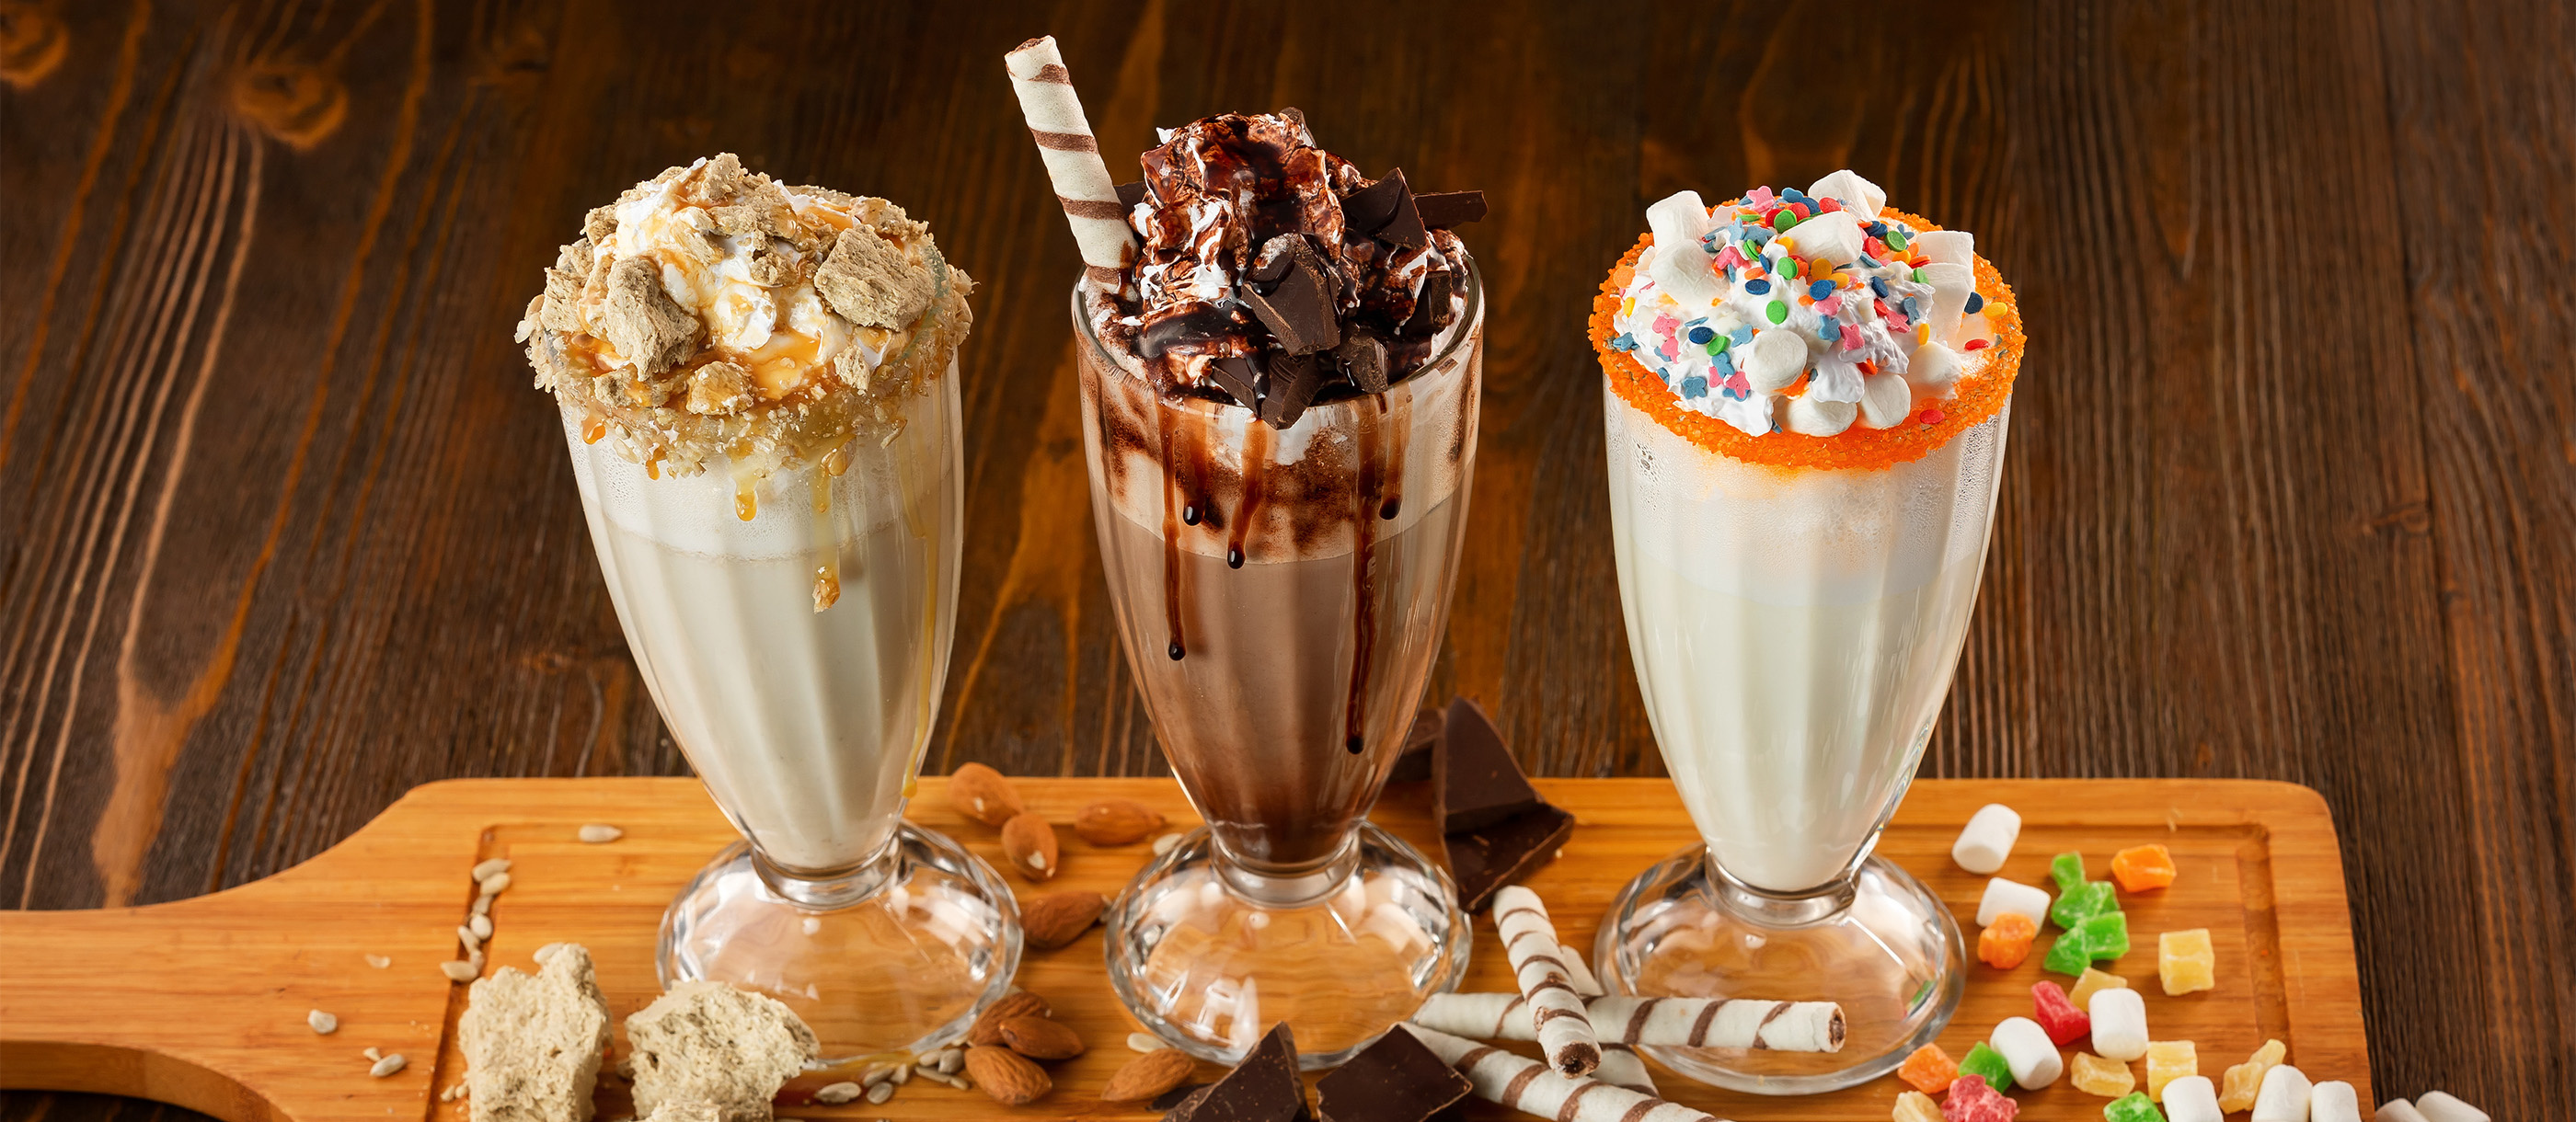 Milkshake: A glass of blended ice cream, milk, and mix-ins or flavorings. 2800x1220 Dual Screen Wallpaper.